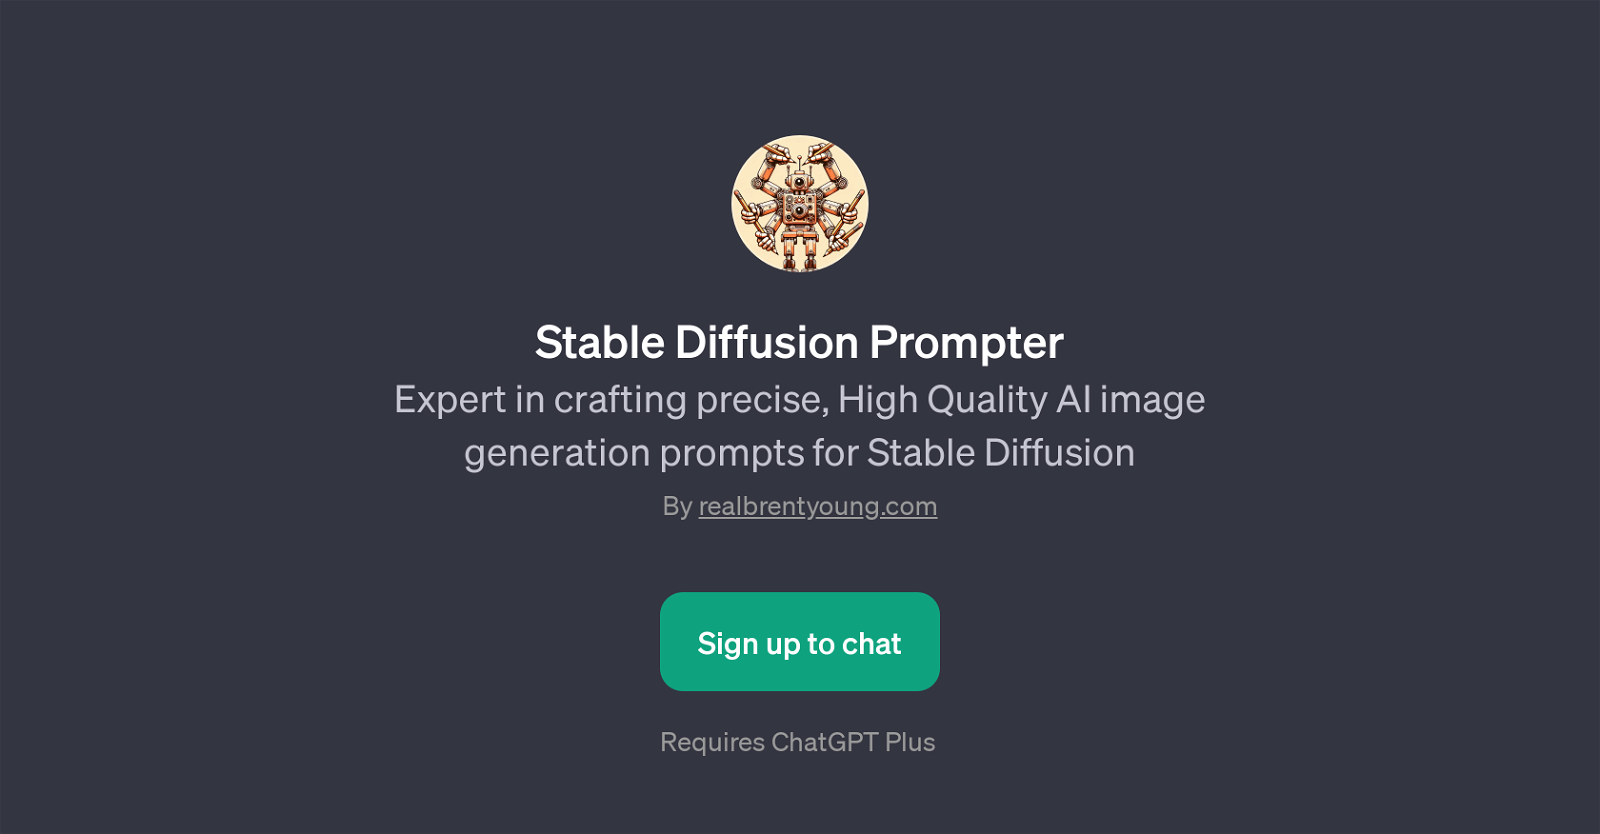 Stable Diffusion Prompter website